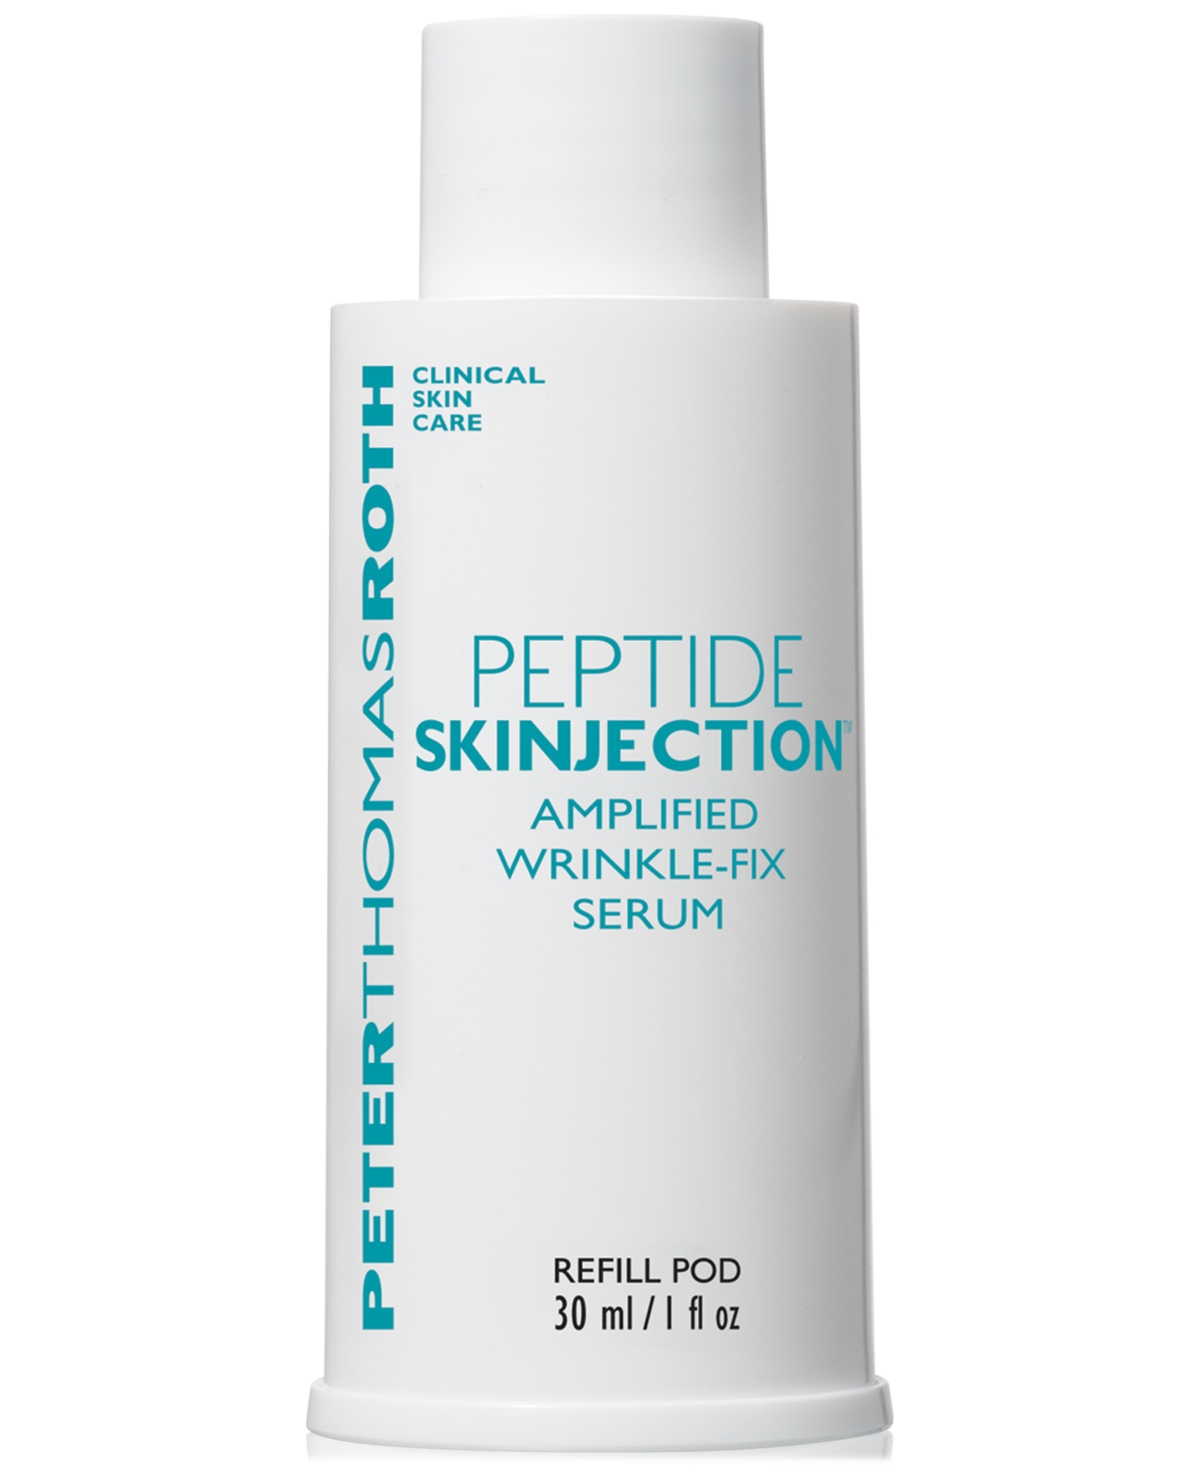 Peter Thomas Roth Peptide Skinjection Amplified Wrinkle-fix Serum Refill Pod, 1 oz In No Color